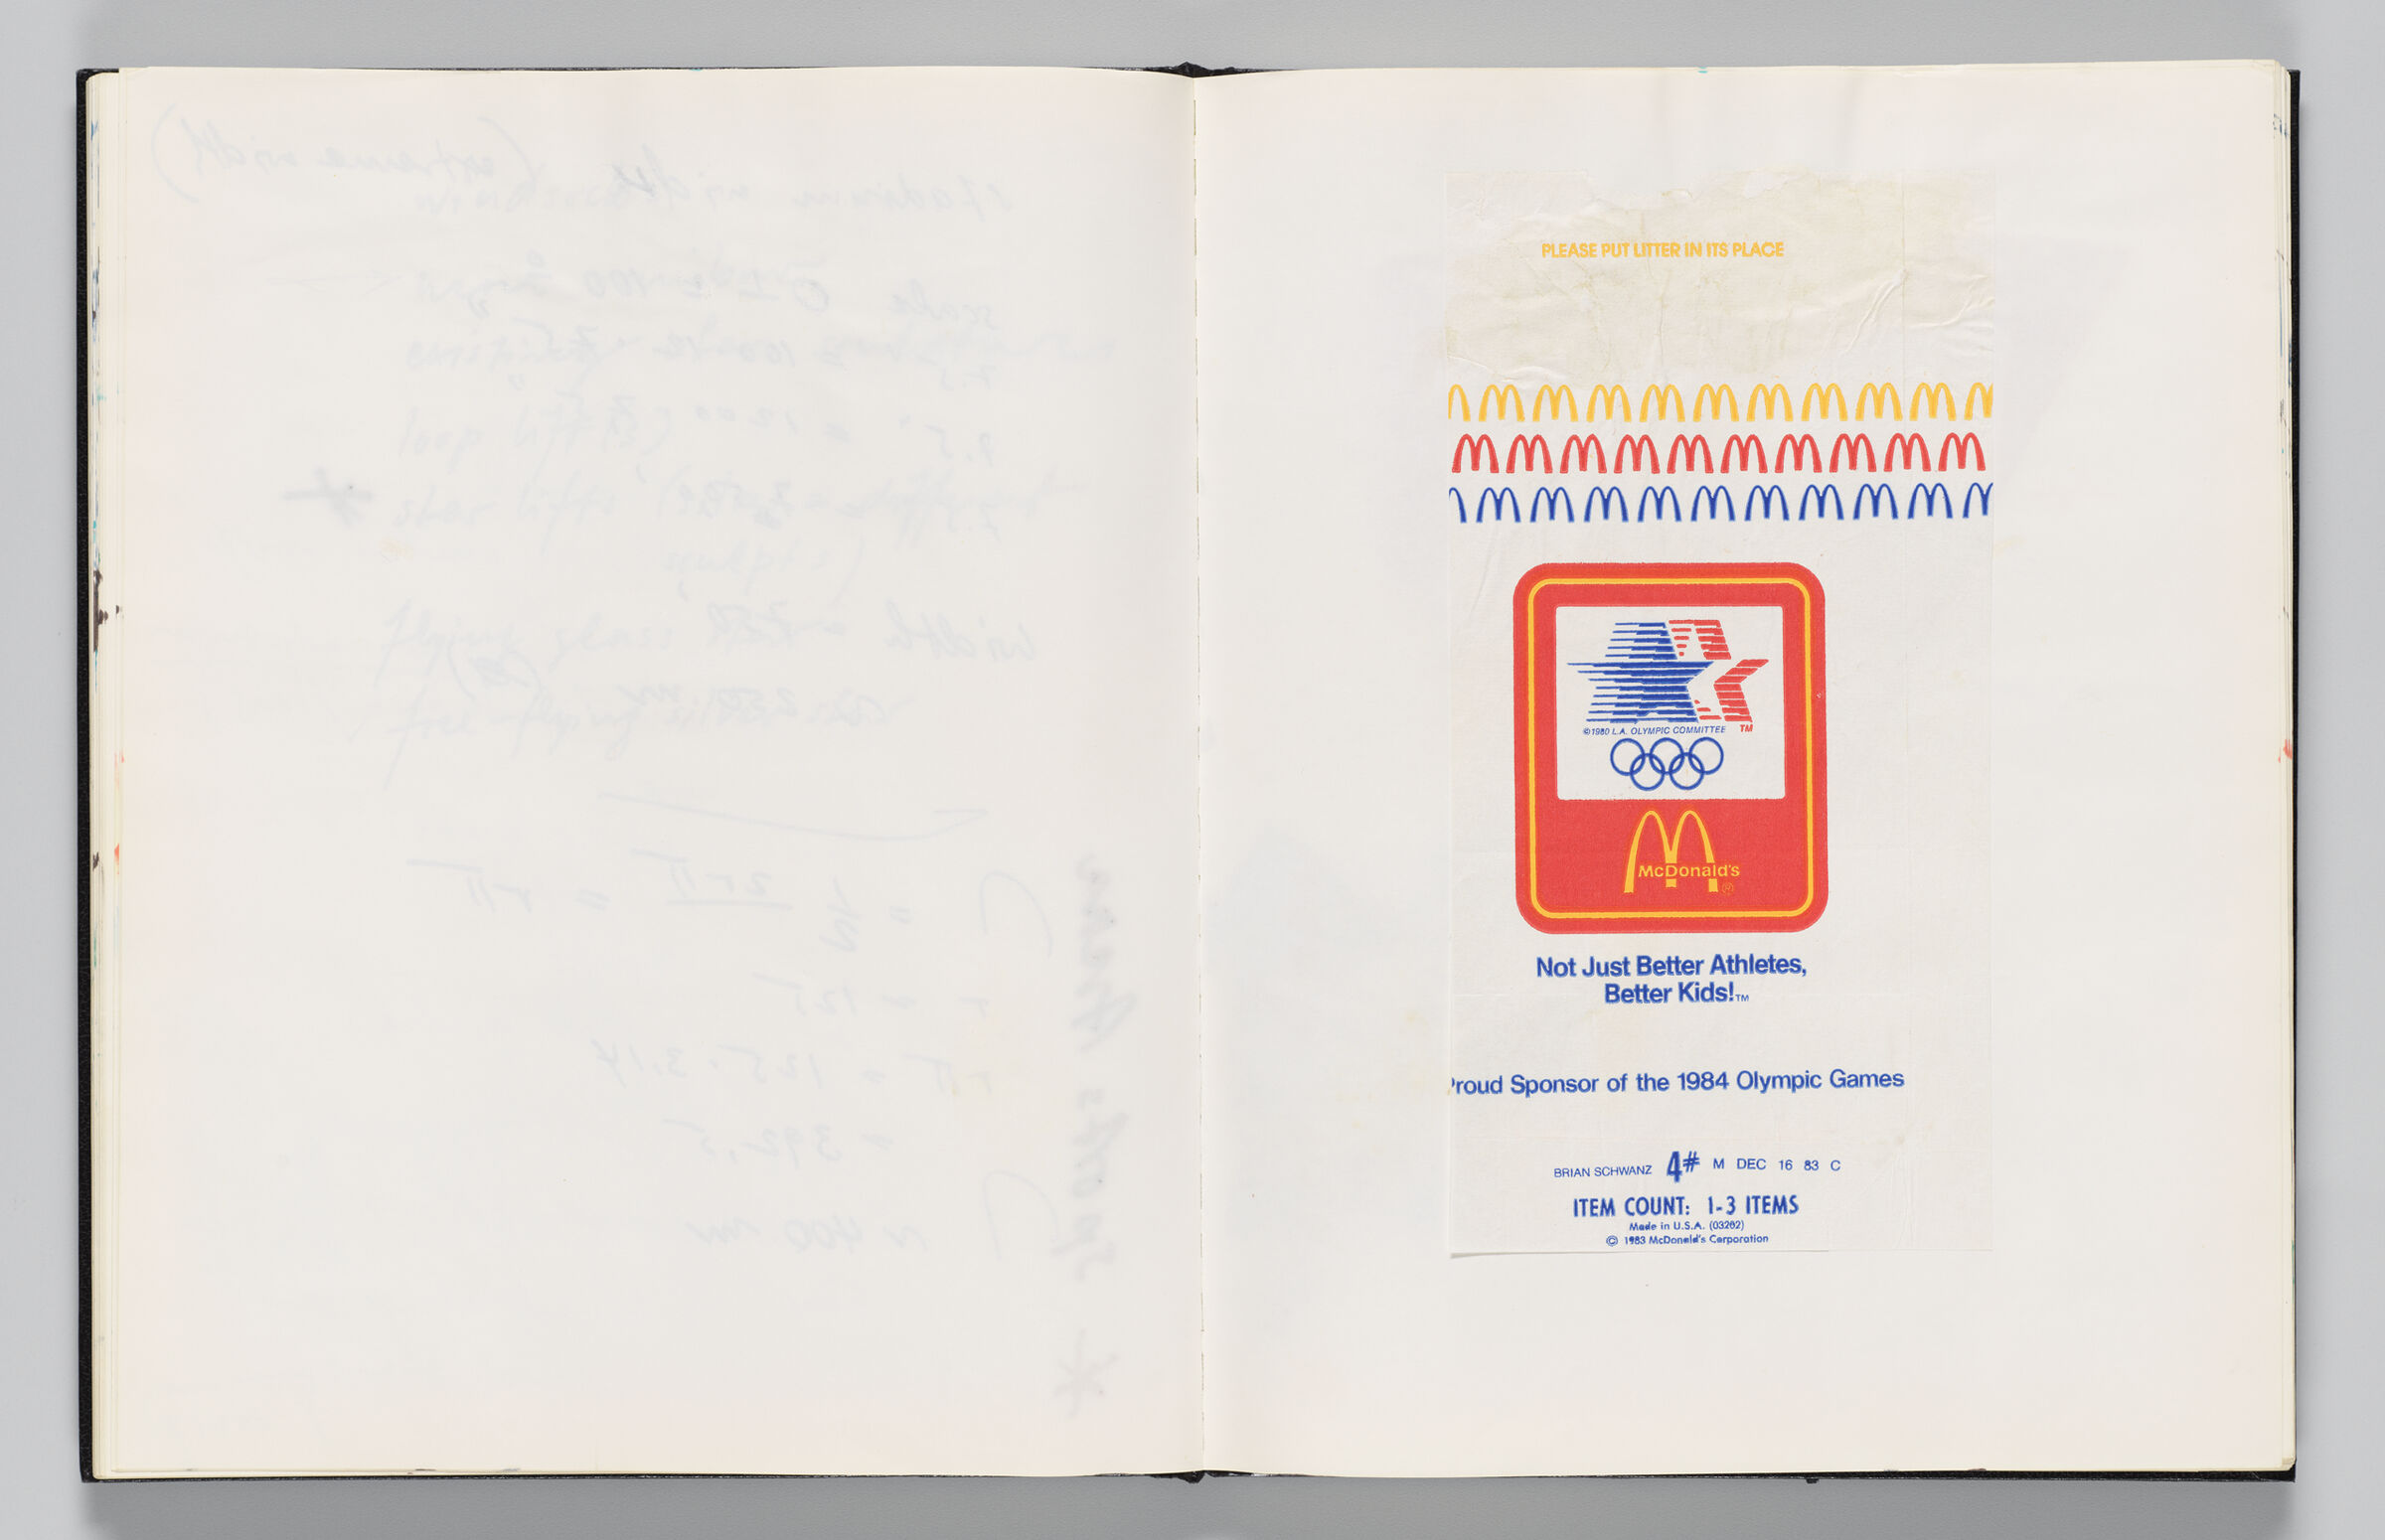 Untitled (Bleed-Through Of Previous Page, Left Page); Untitled (Adhered Mcdonald's Bag, Right Page)